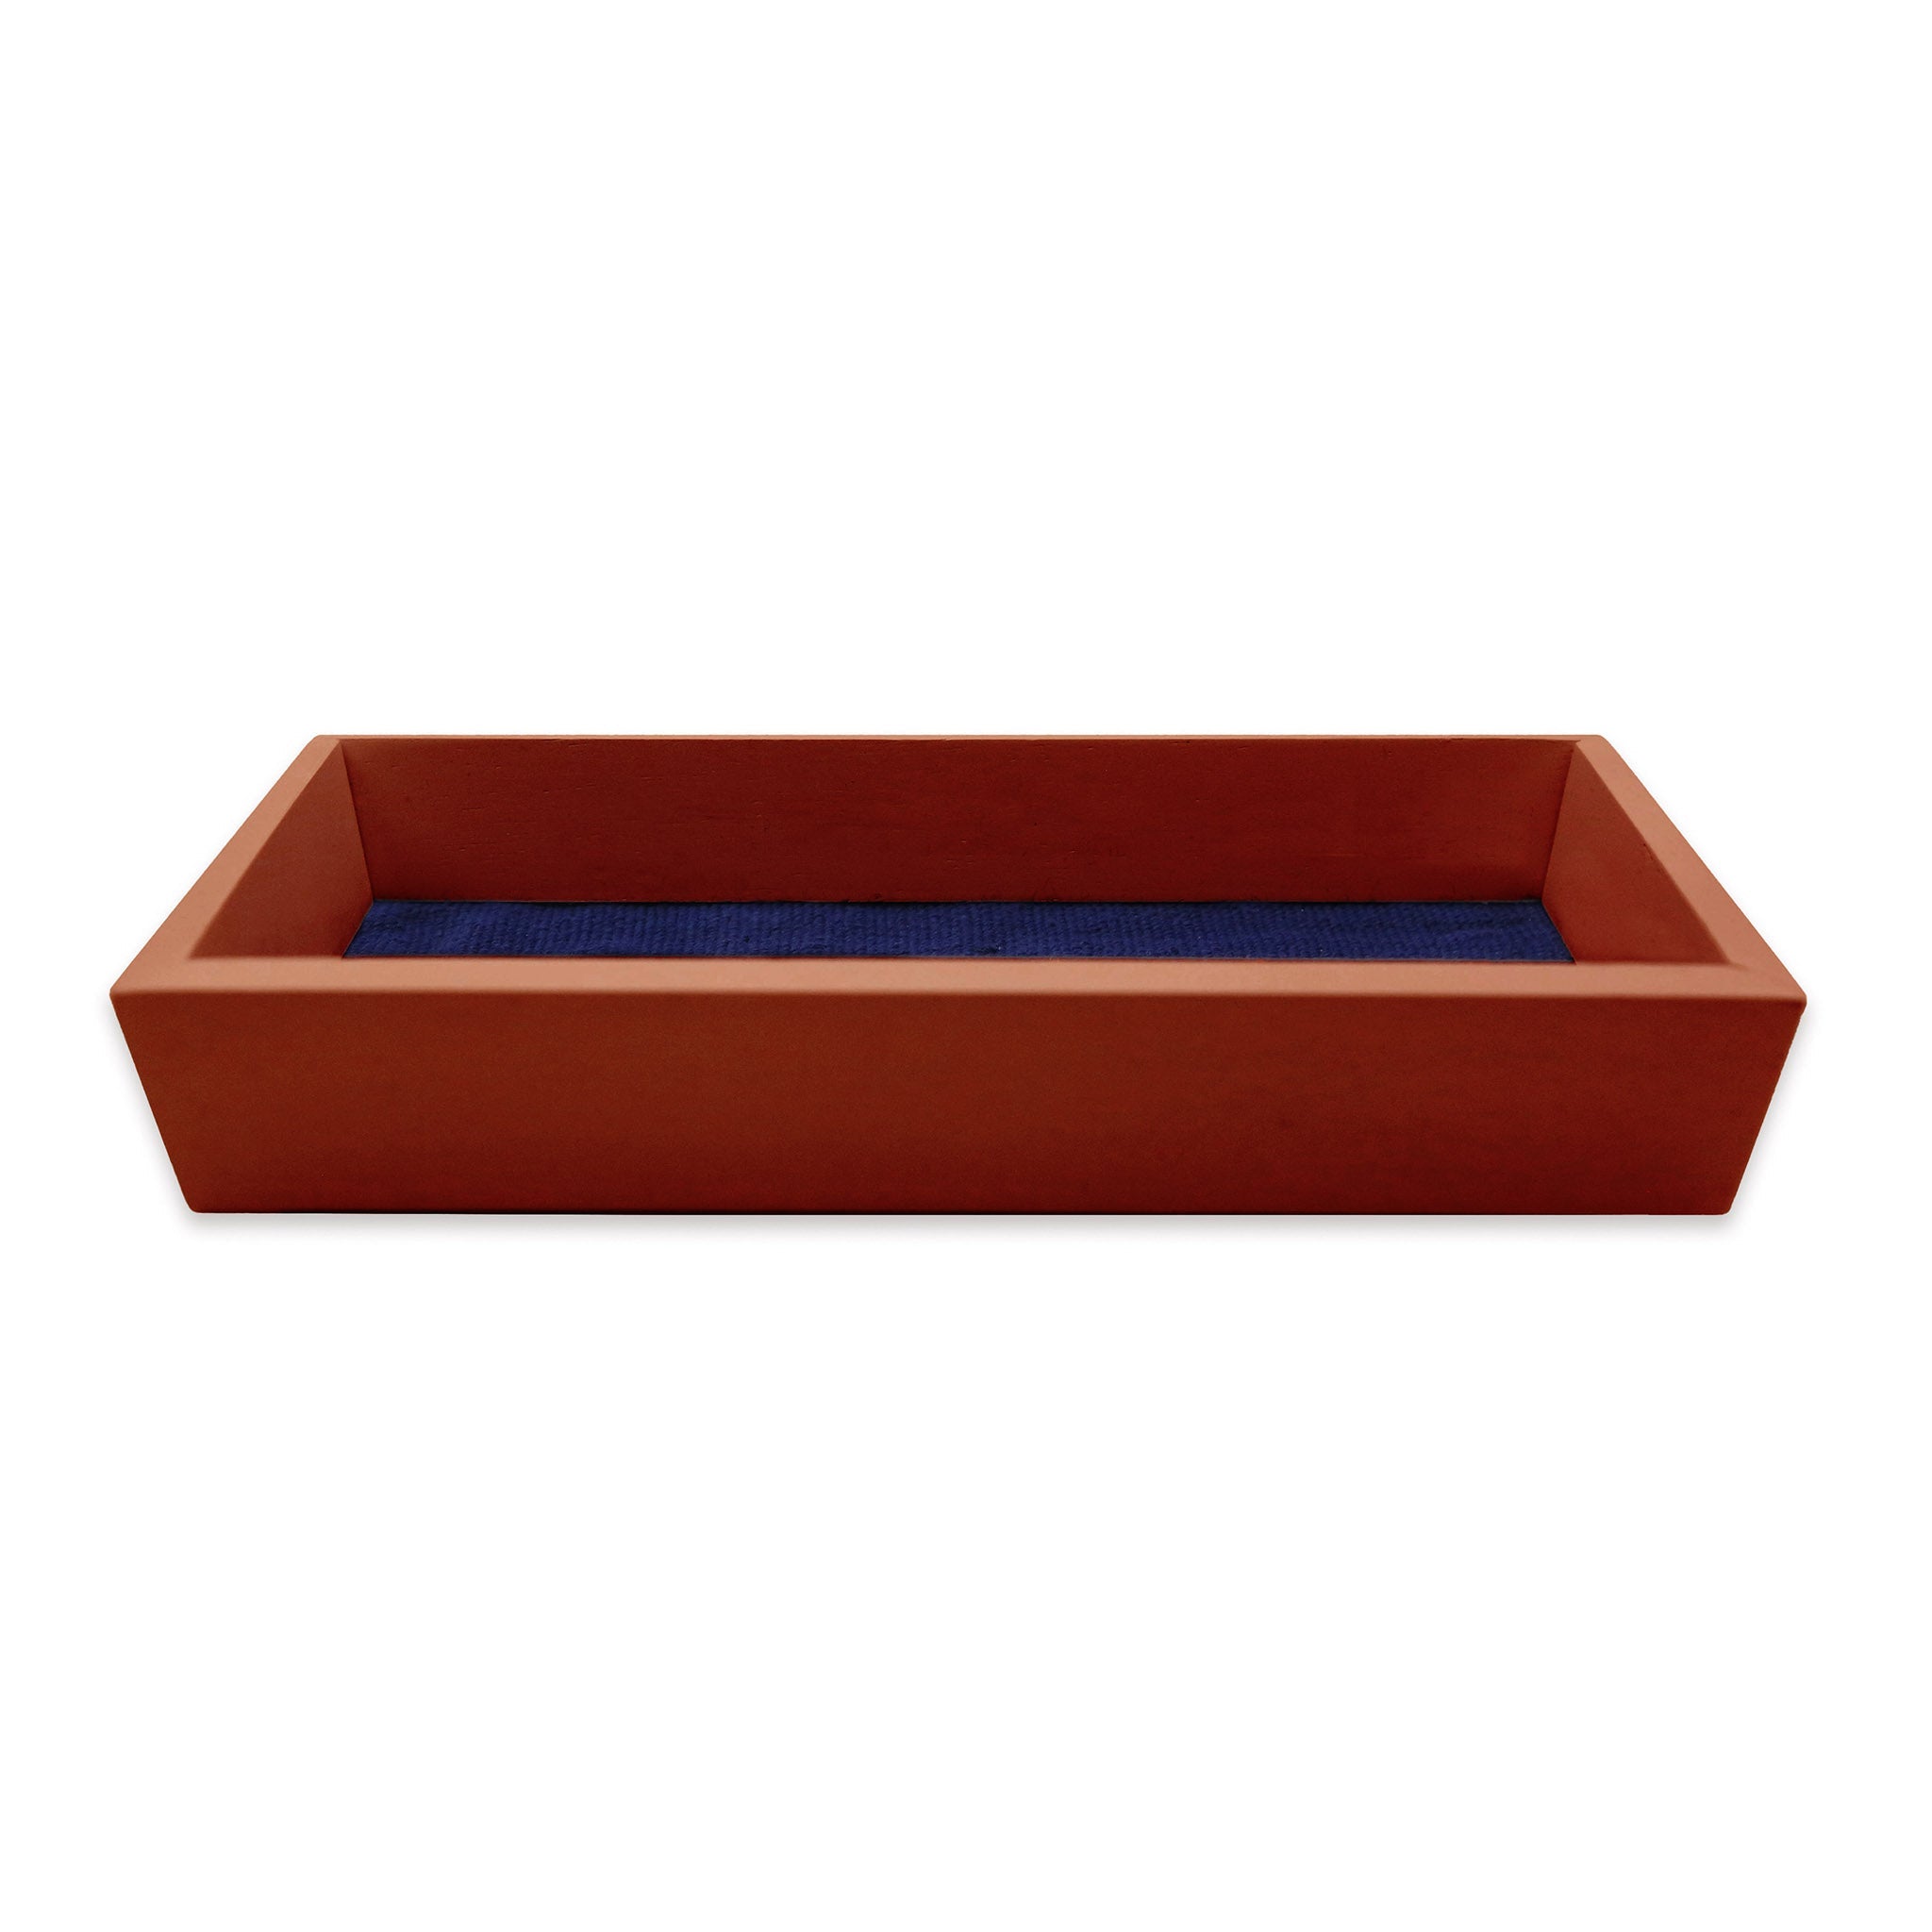 Georgetown Valet Tray (Classic Navy) (Chestnut Wood)